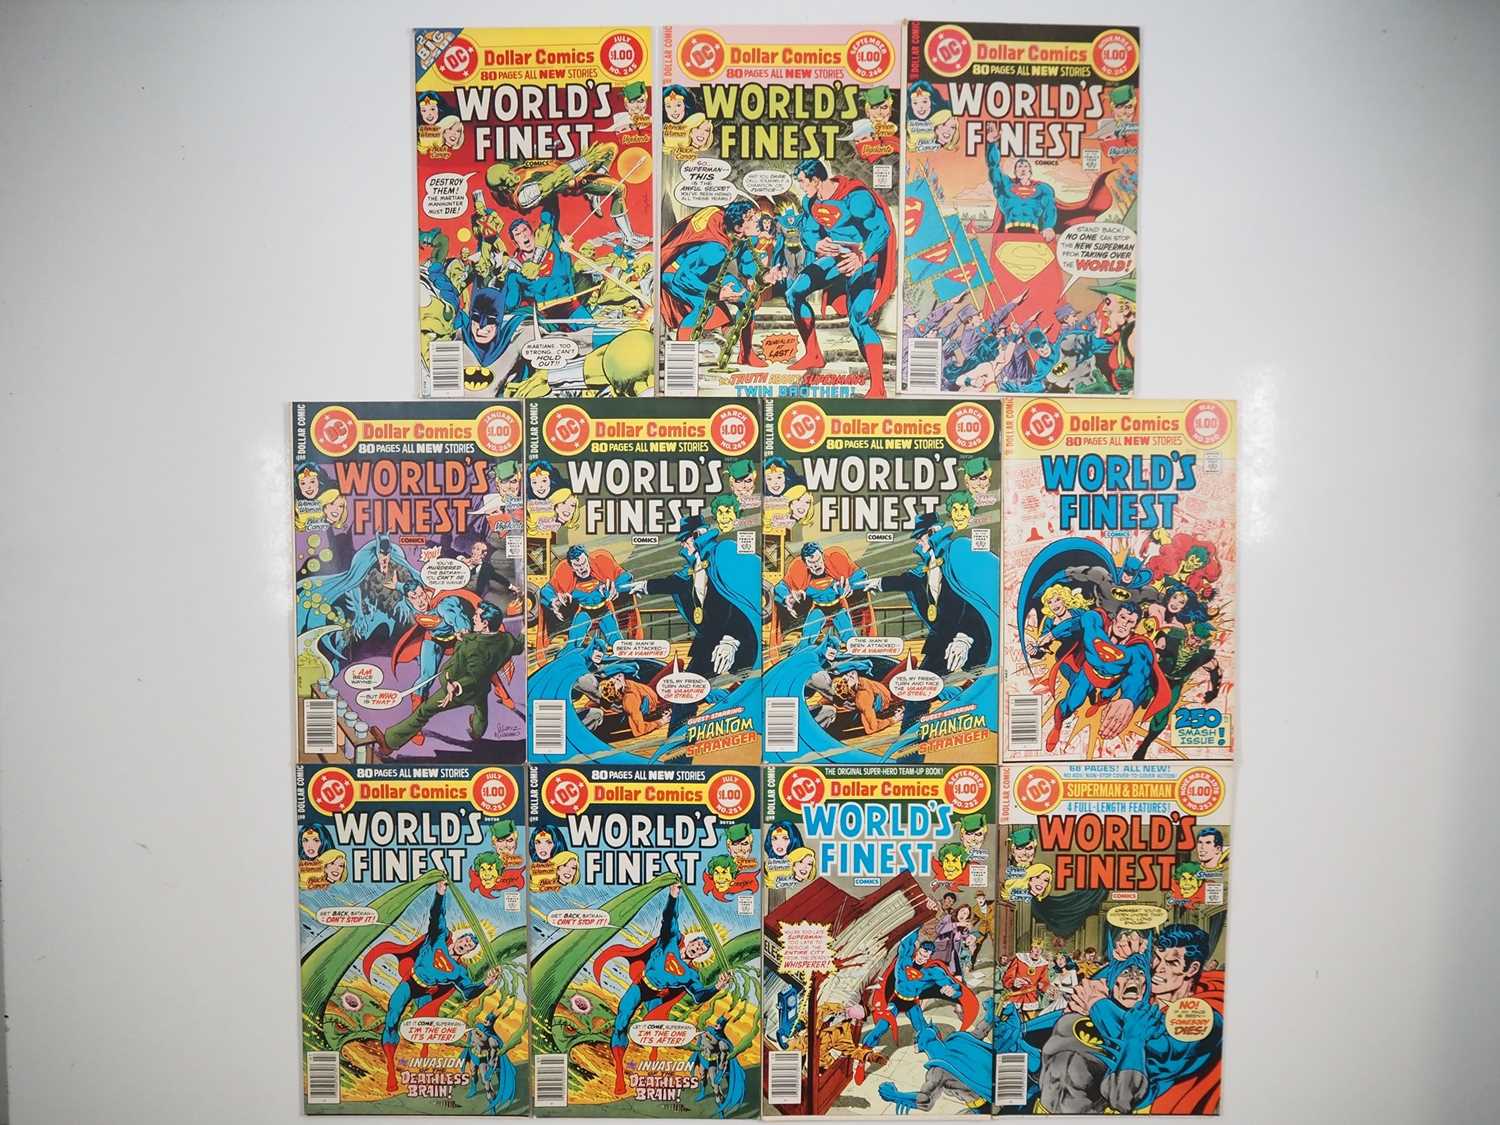 WORLDS FINEST #245, 246, 247, 248, 249 (x 2), 250, 251 (x2), 252, 253 (11 in Lot) - (1977/1978 - DC)